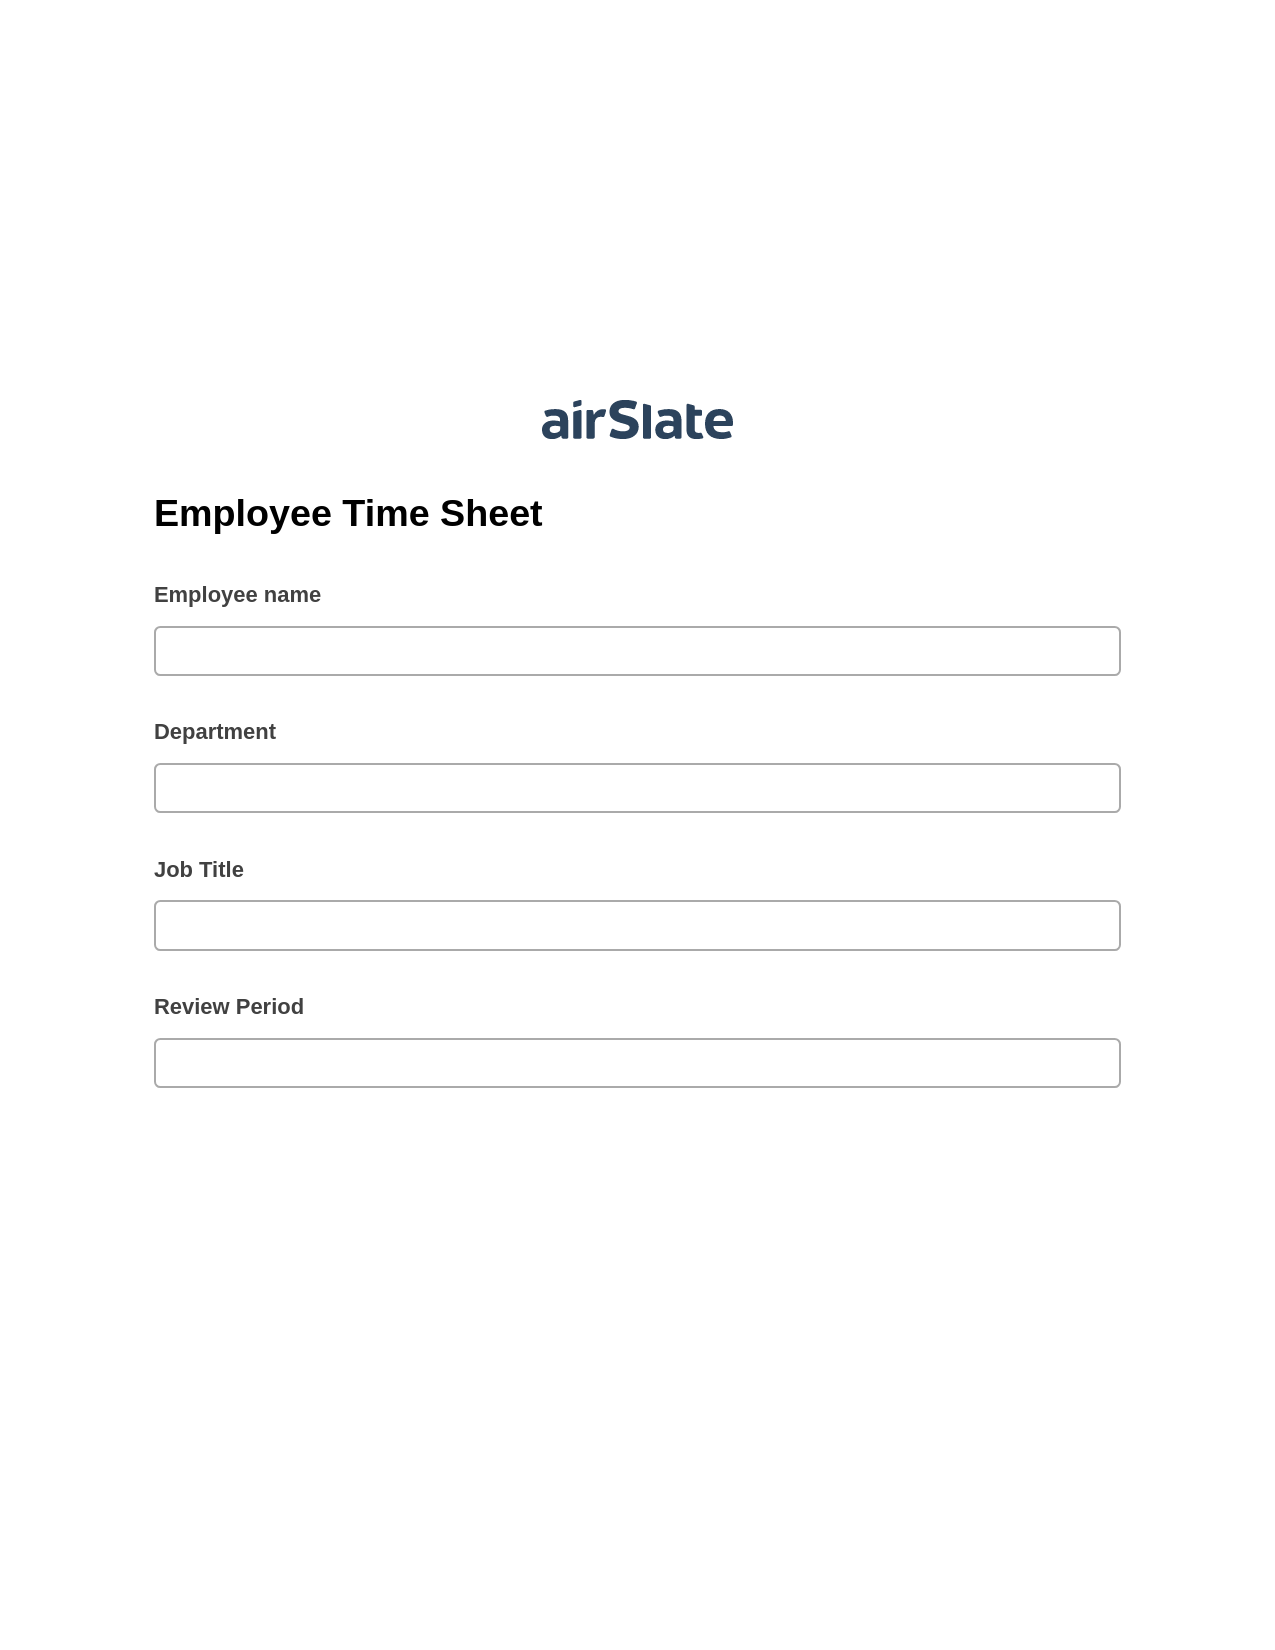 Employee Time Sheet Pre-fill from Google Sheets Bot, Create QuickBooks Invoice Bot, Archive to Dropbox Bot